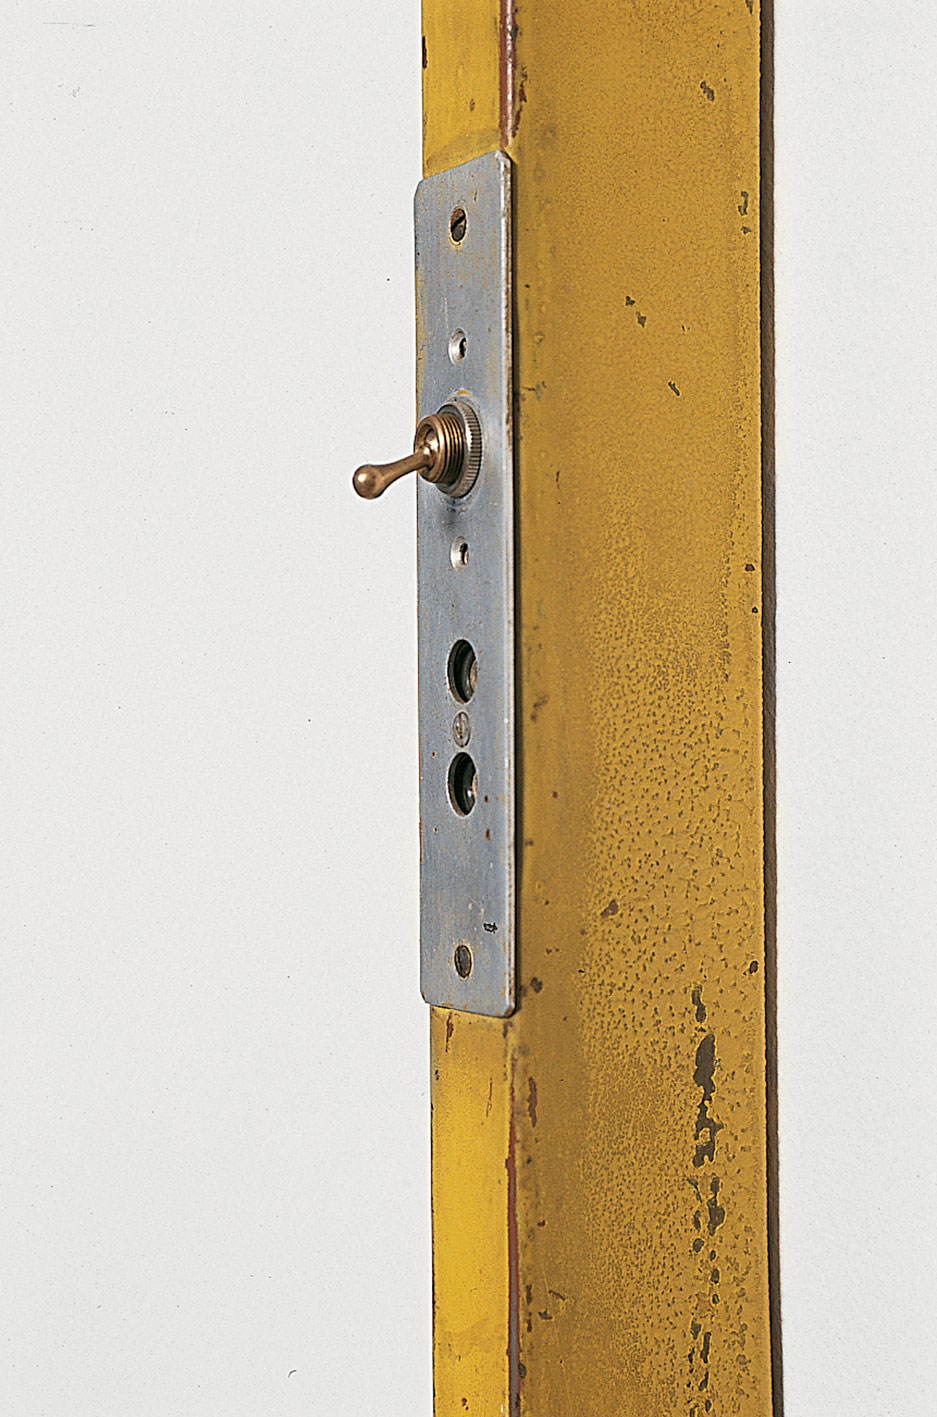 Adjustable swing-jib lamp, mounted on a squared-off long tube to hide the wiring, 1948. Detail of the light switch. Provenance: École de la Verrerie, Croismare.